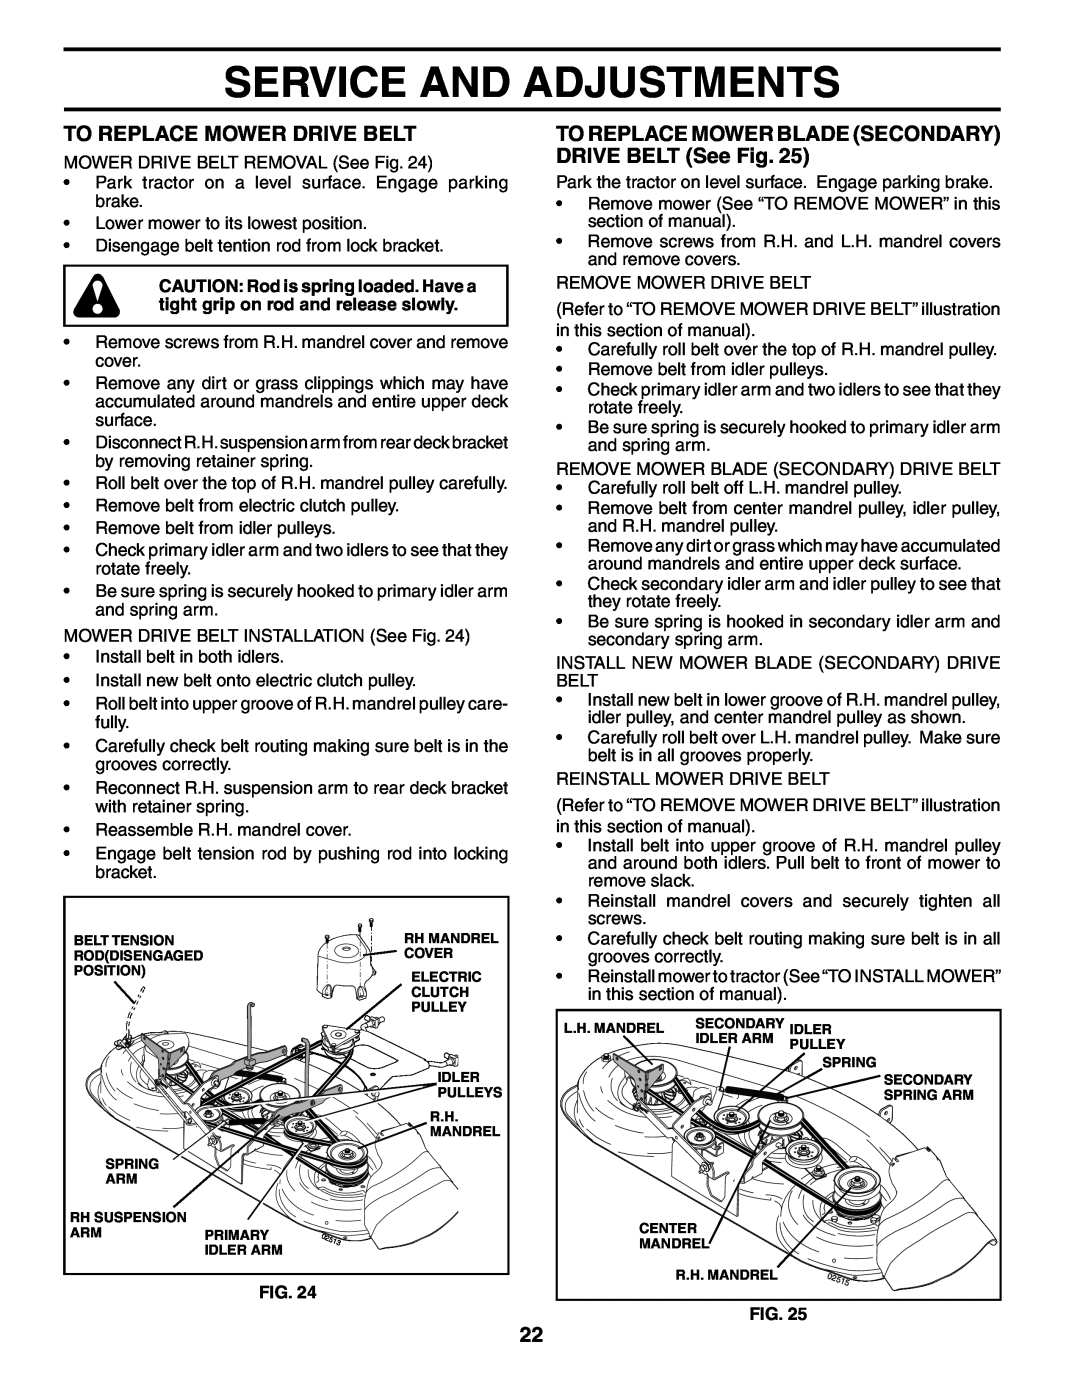 Poulan PDGT26H48C owner manual To Replace Mower Drive Belt, TO REPLACE MOWER BLADE SECONDARY DRIVE BELT See Fig 